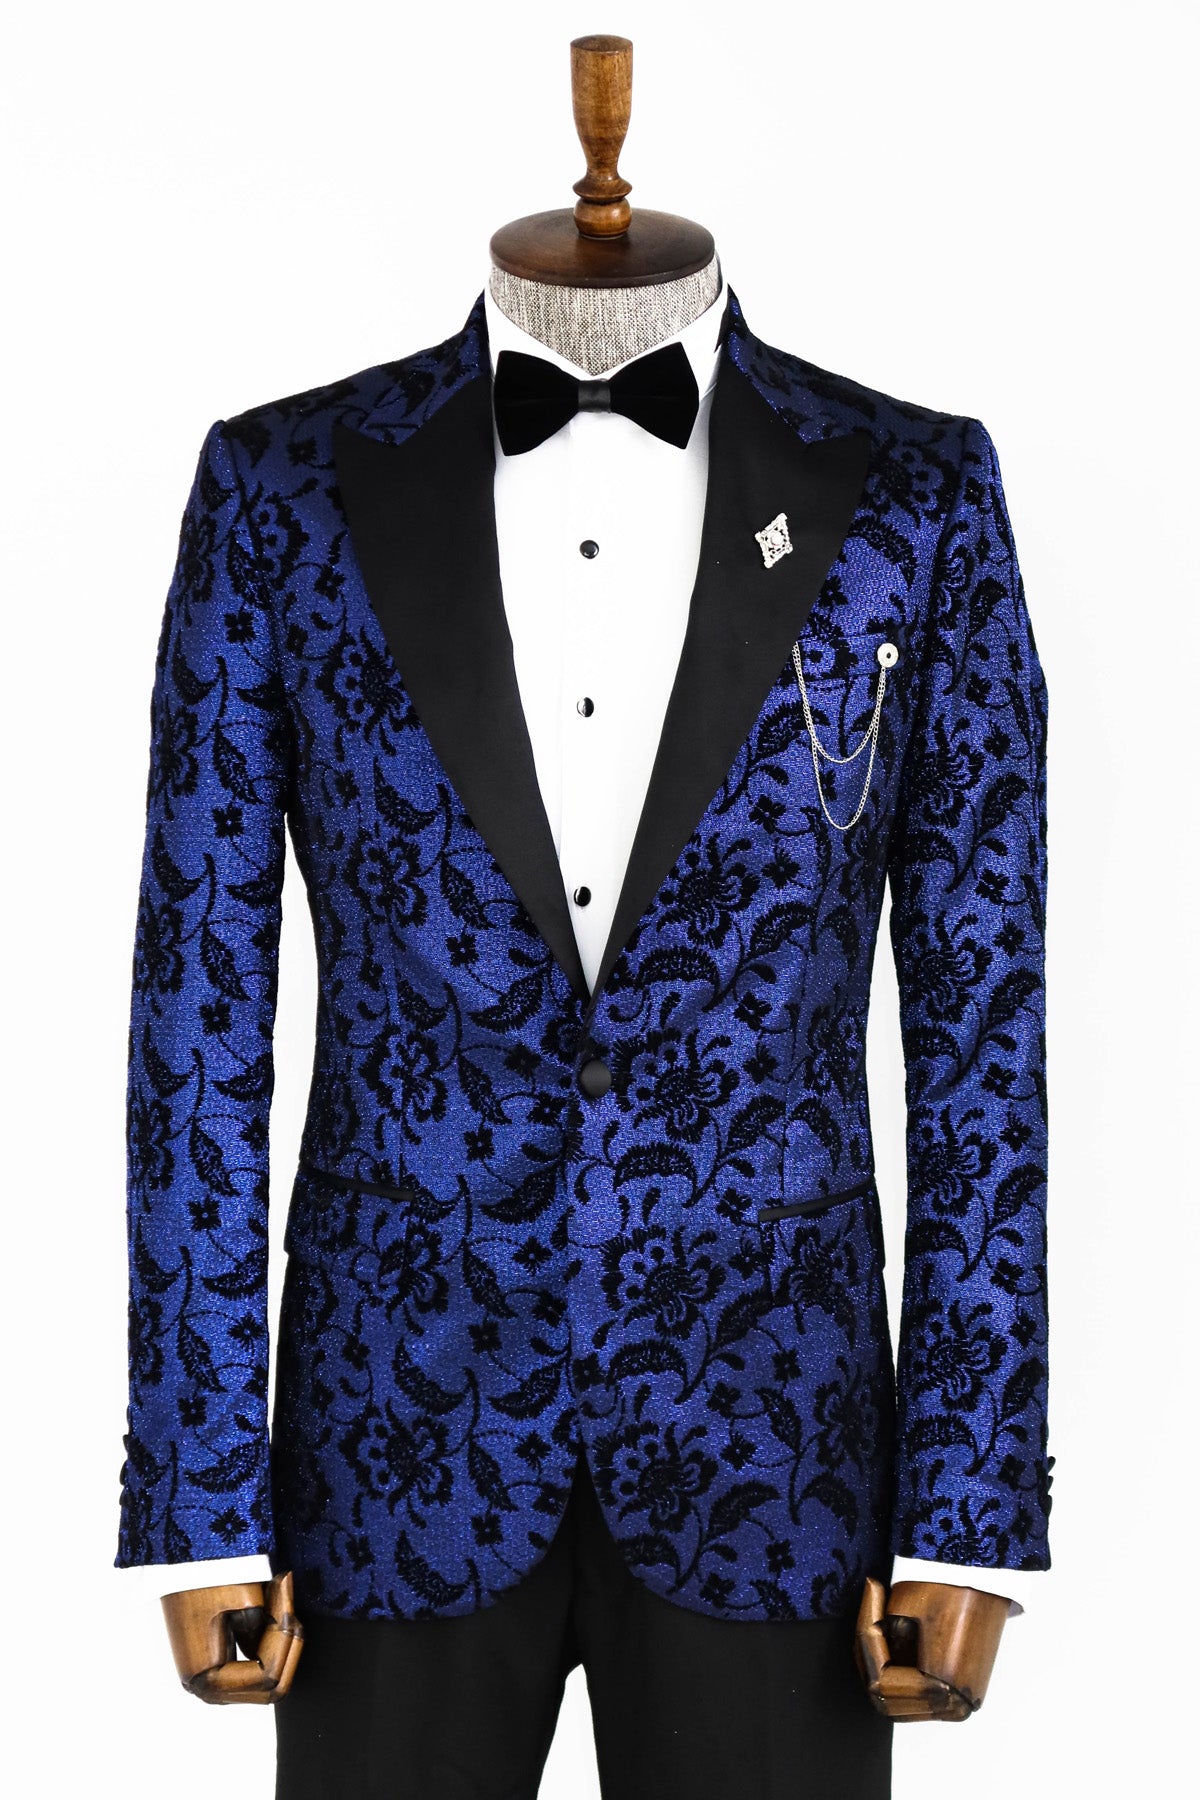 Midnight Blue Men's Sparkle Prom Blazer with Black Floral Design from KCT Menswear, perfect for standing out at prom."